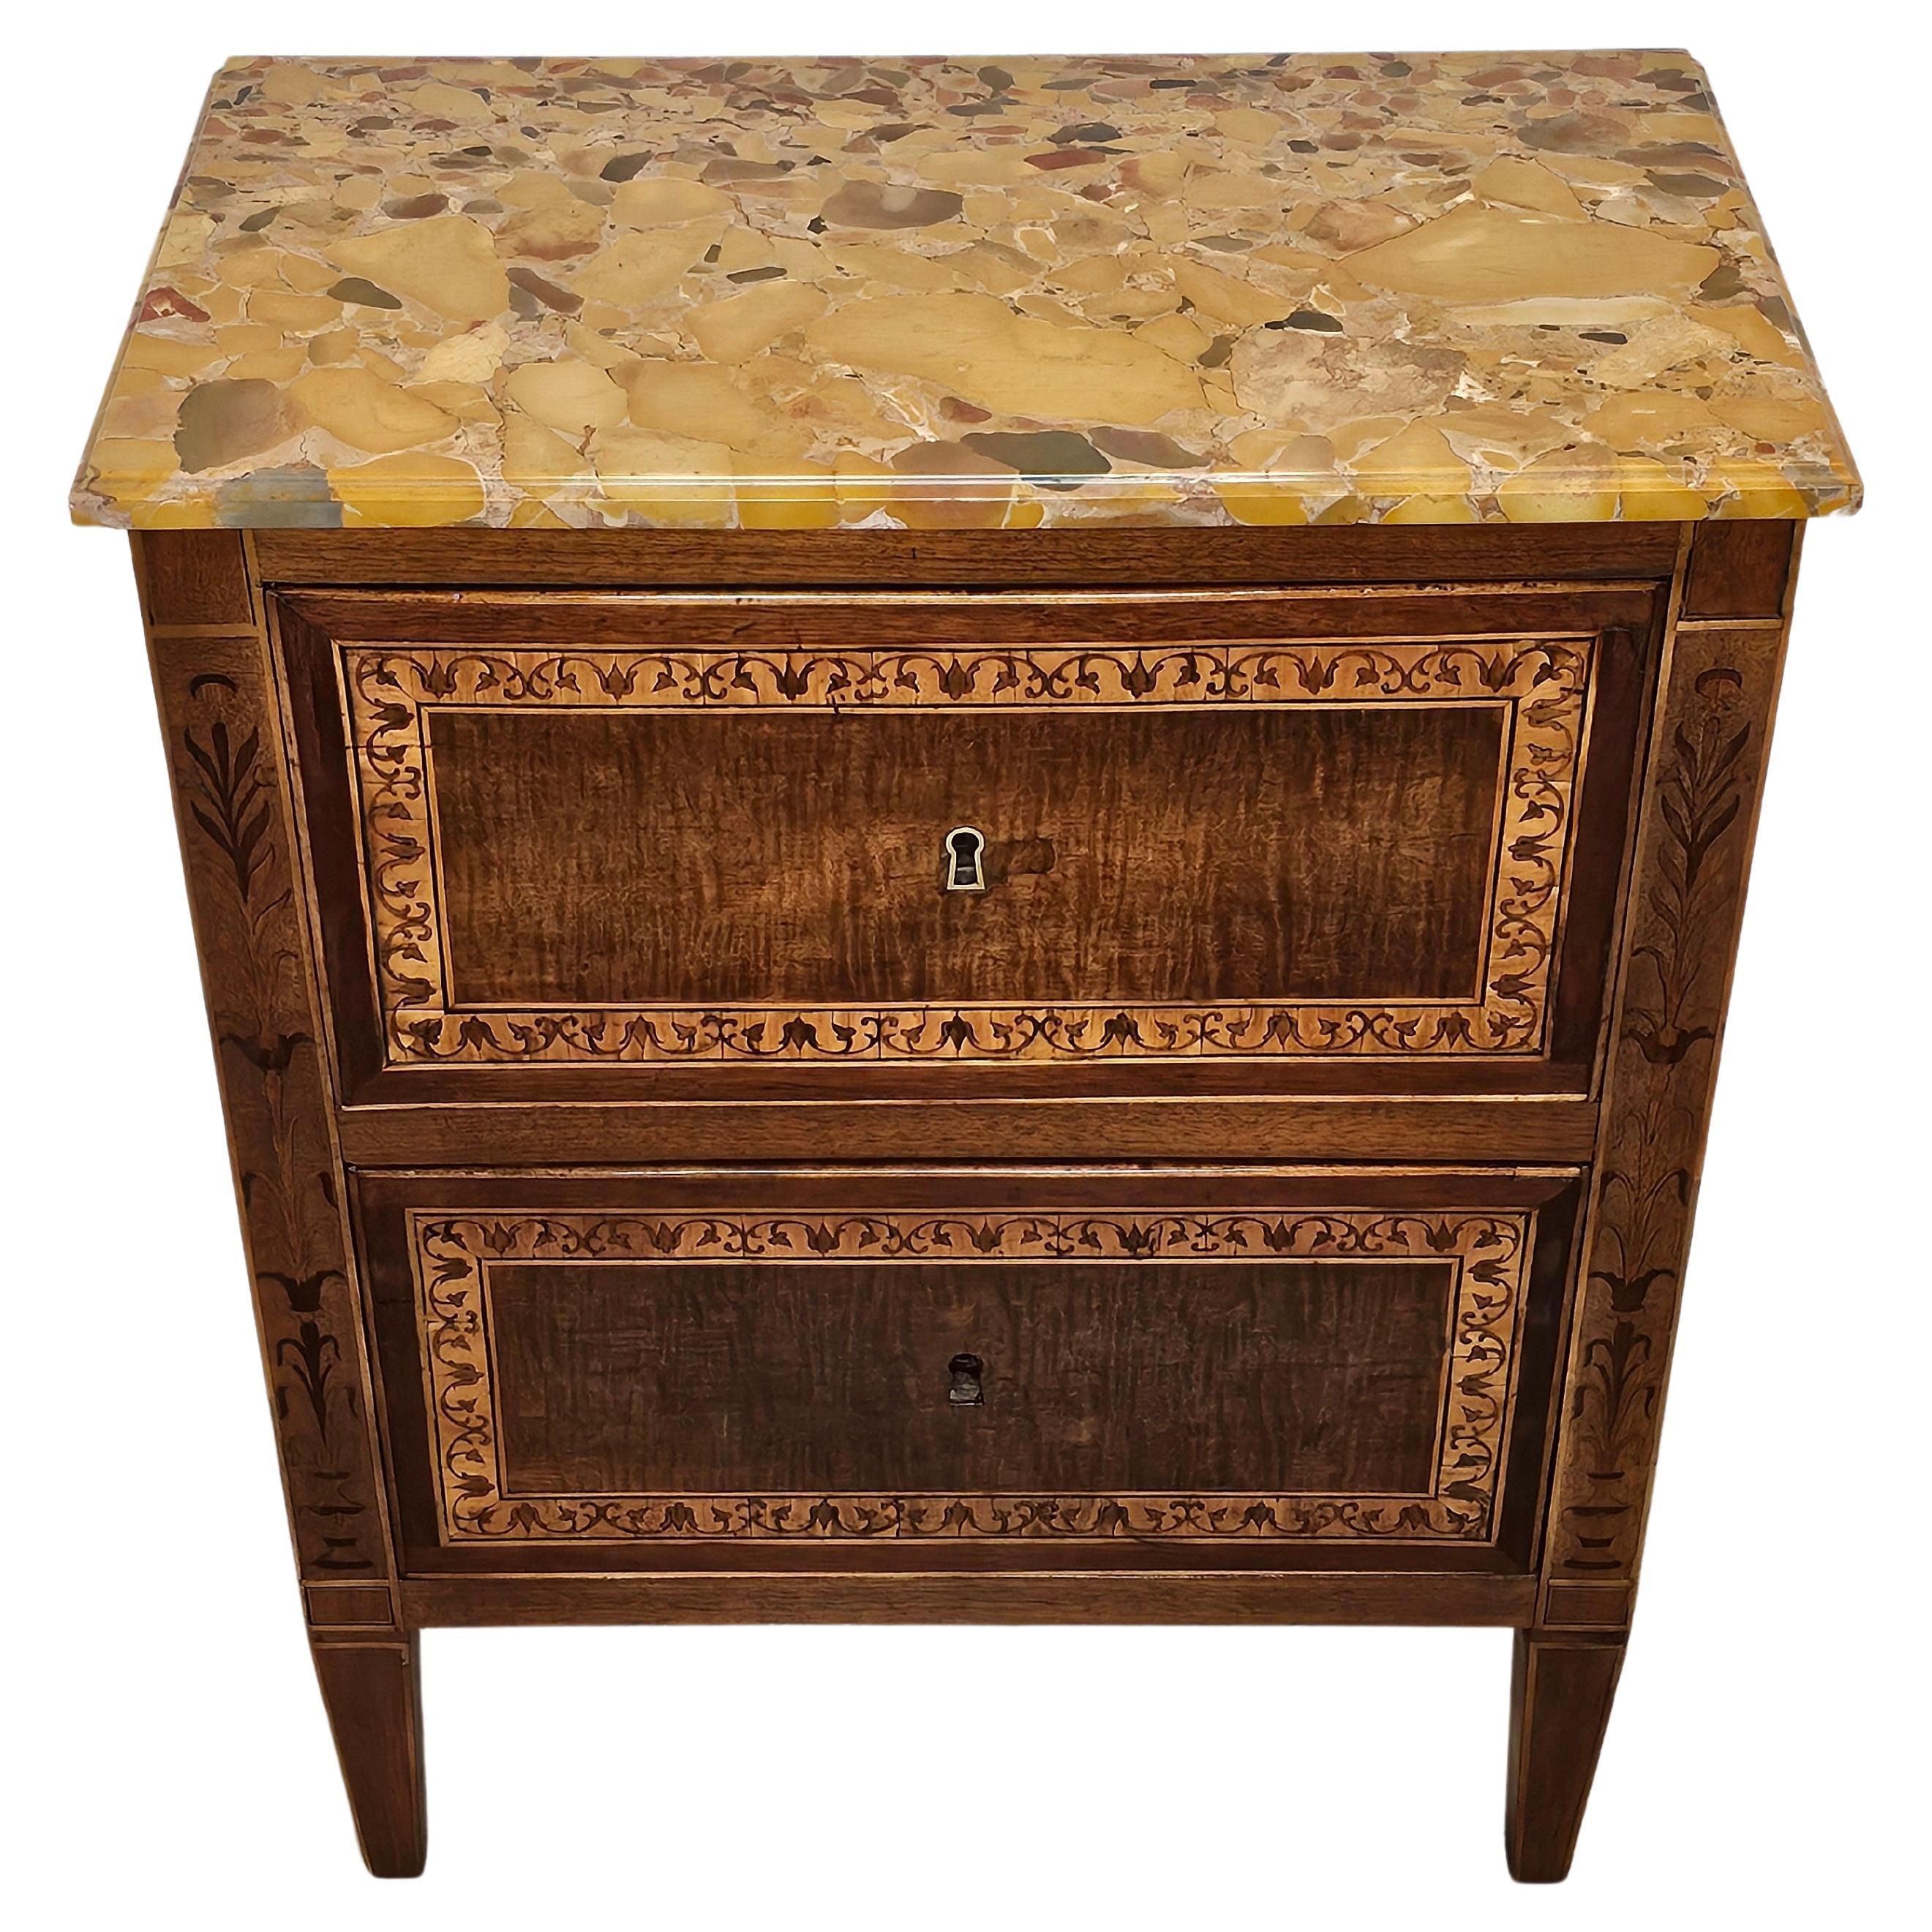 Antique Italian / French Neoclassical Marquetry Chest Of Drawers Nightstand